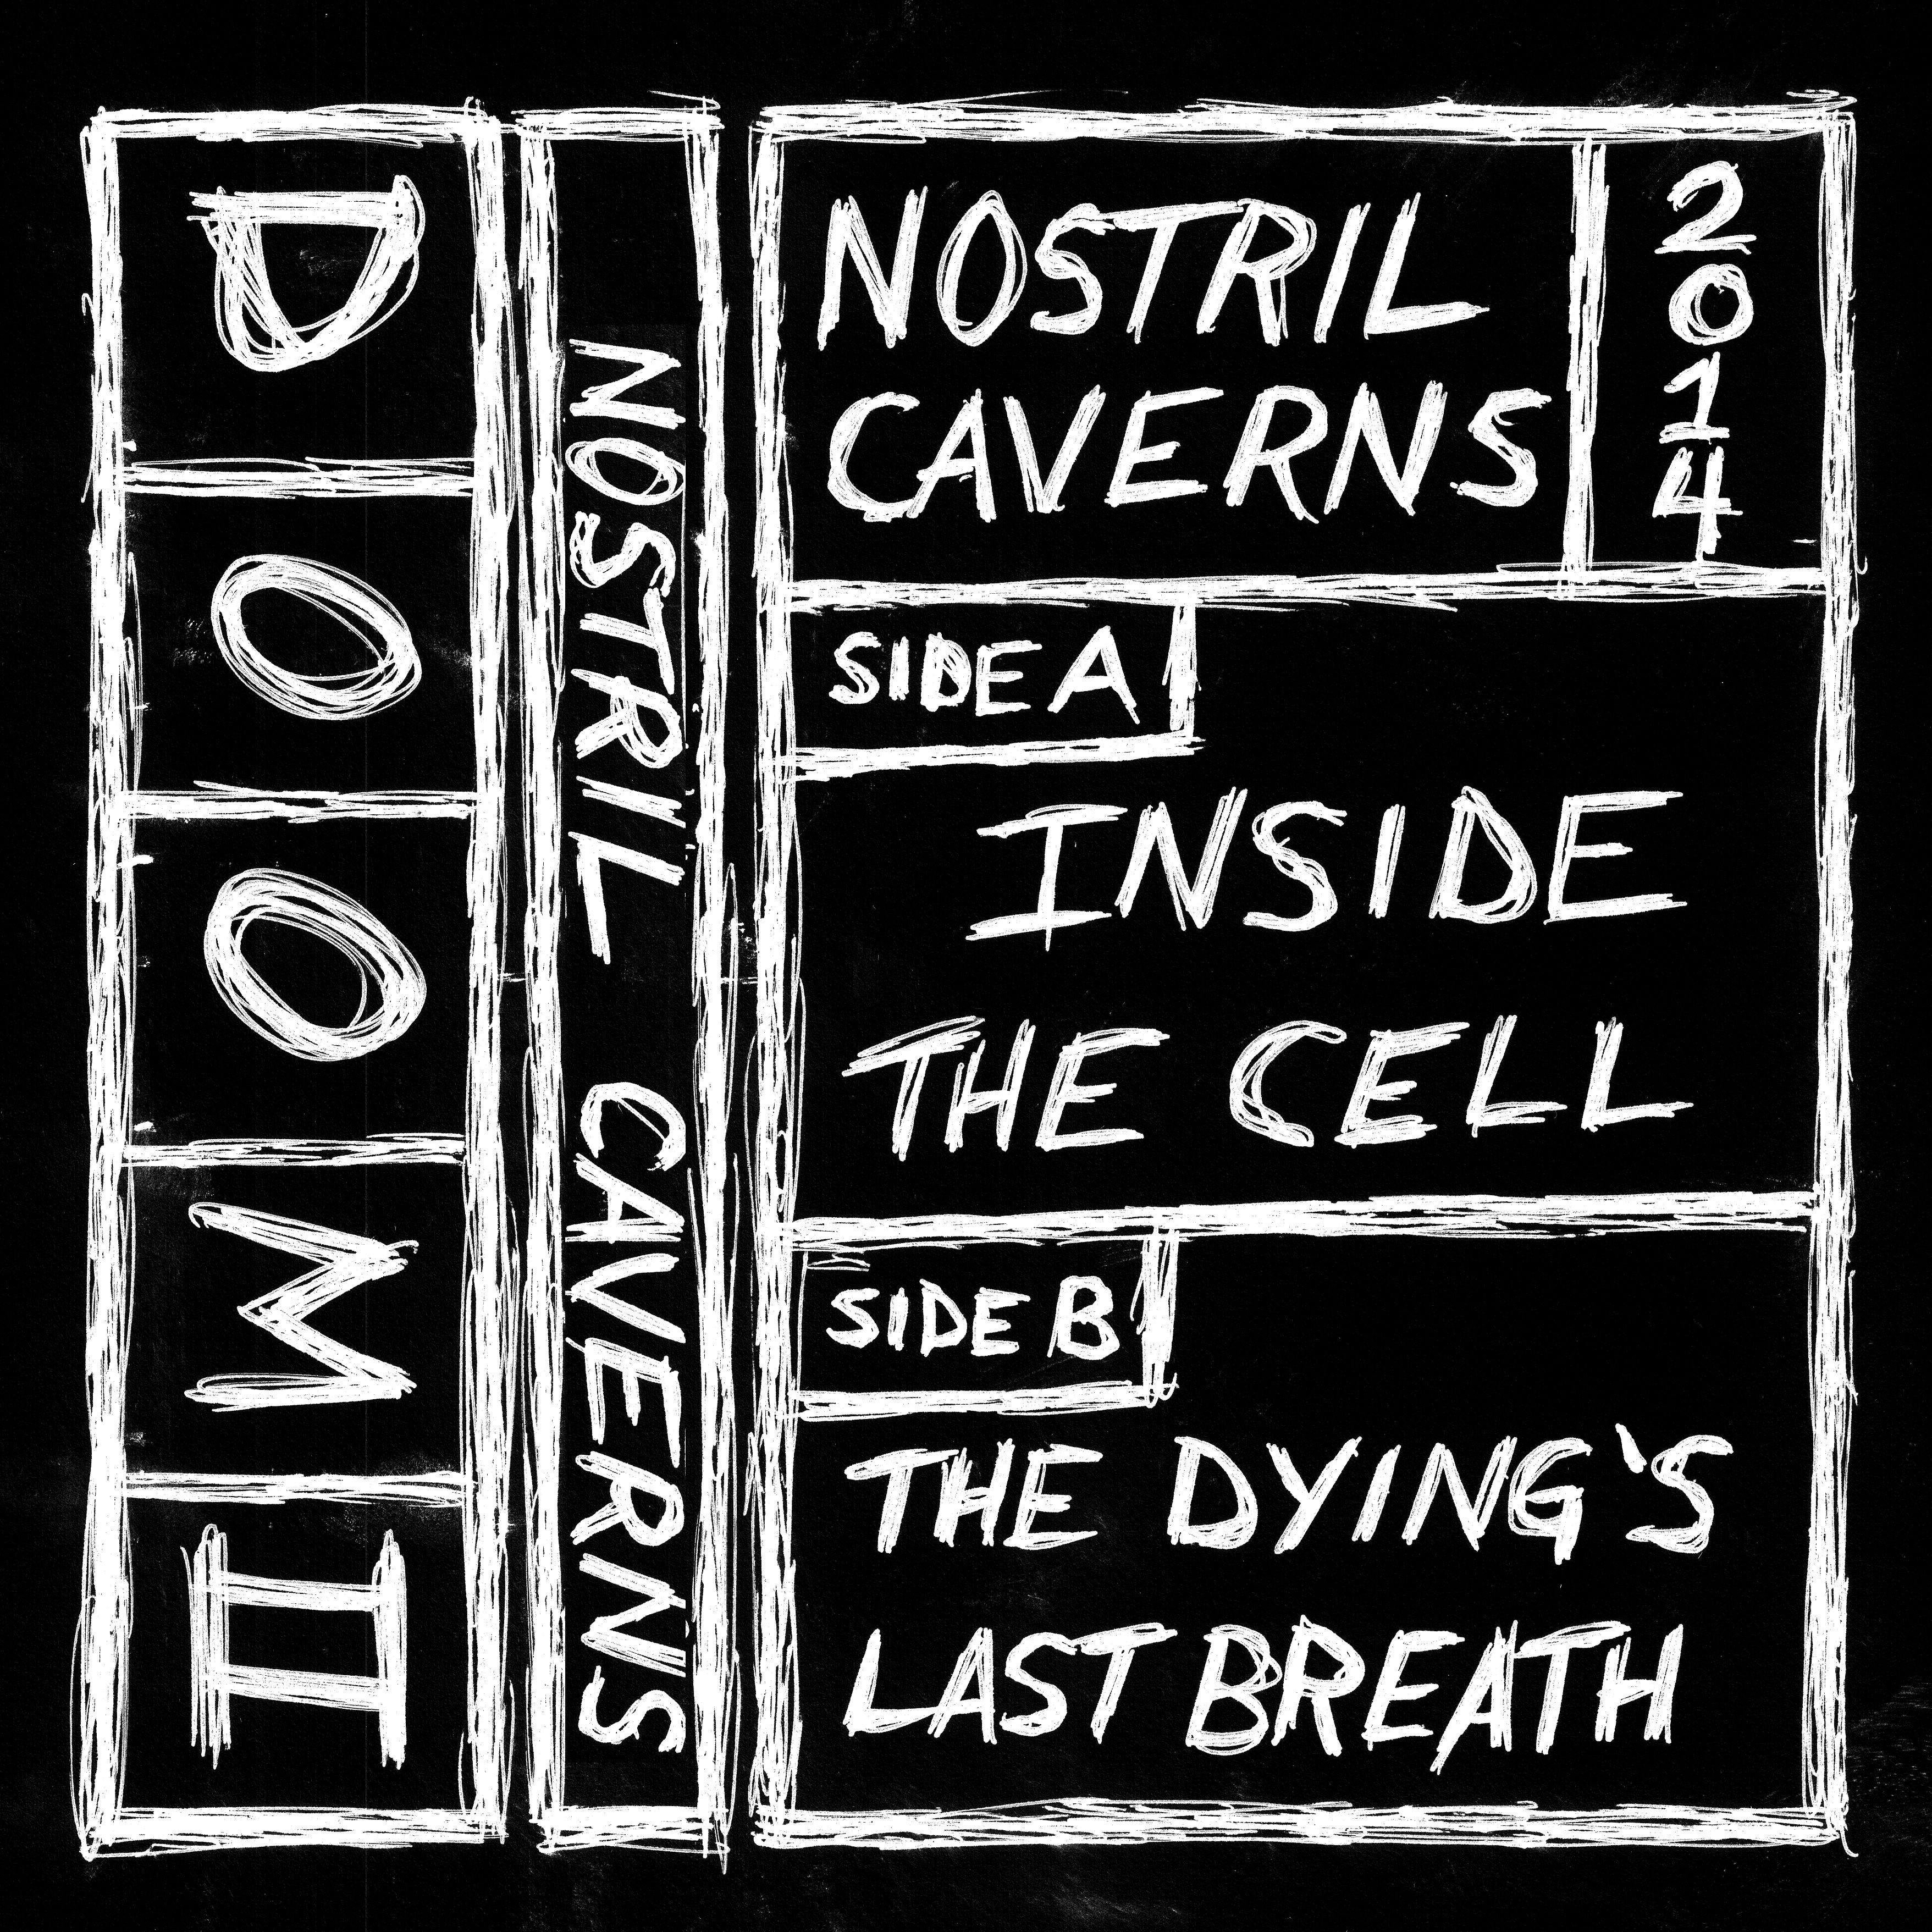 Nostril Caverns – Inside the Cell/The Dying’s Last Breath Review